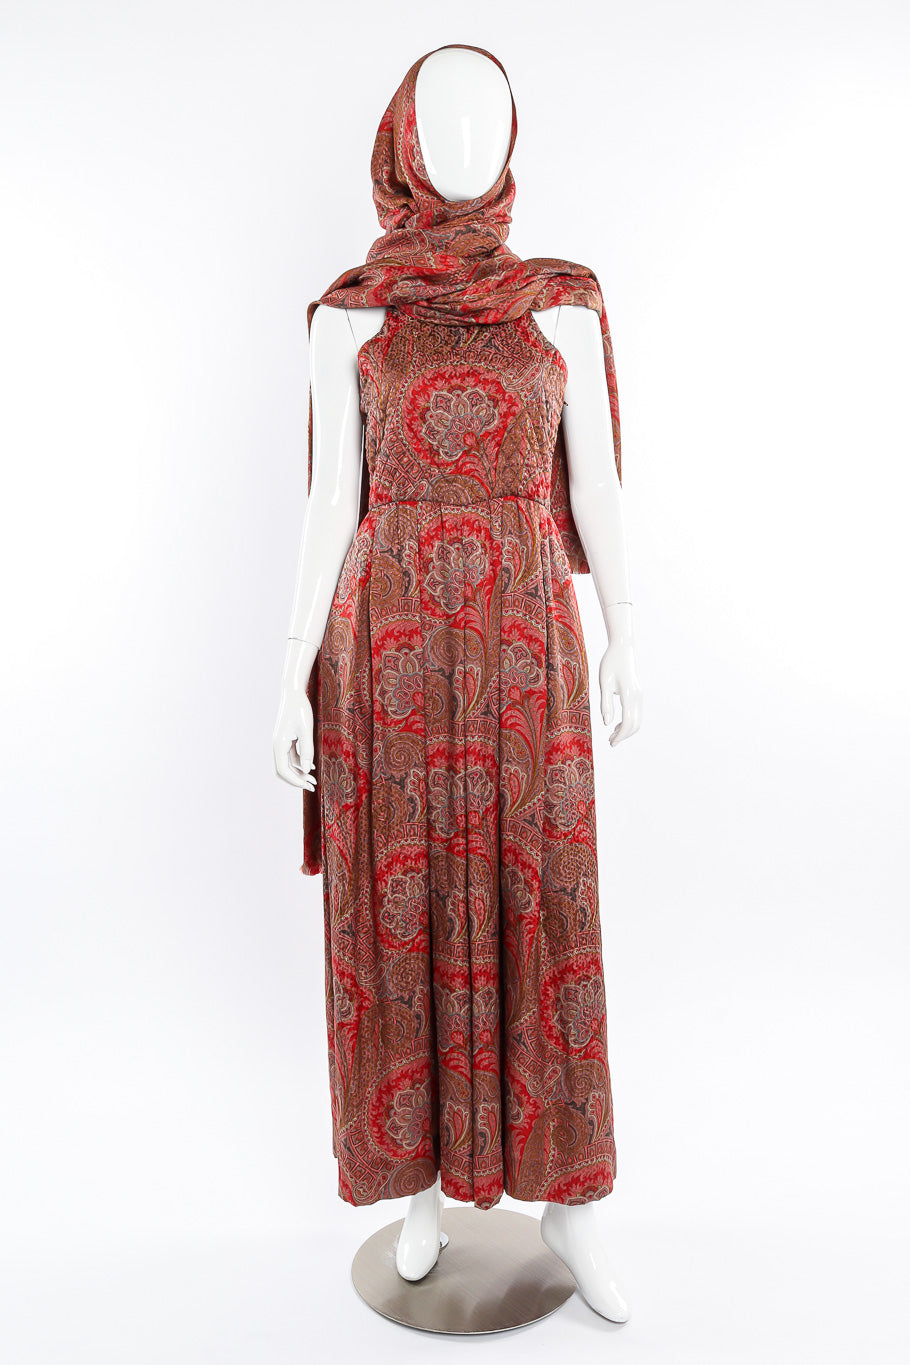 Jumpsuit with large shawl by Carolyne Roehm on mannequin shawl around head  @recessla